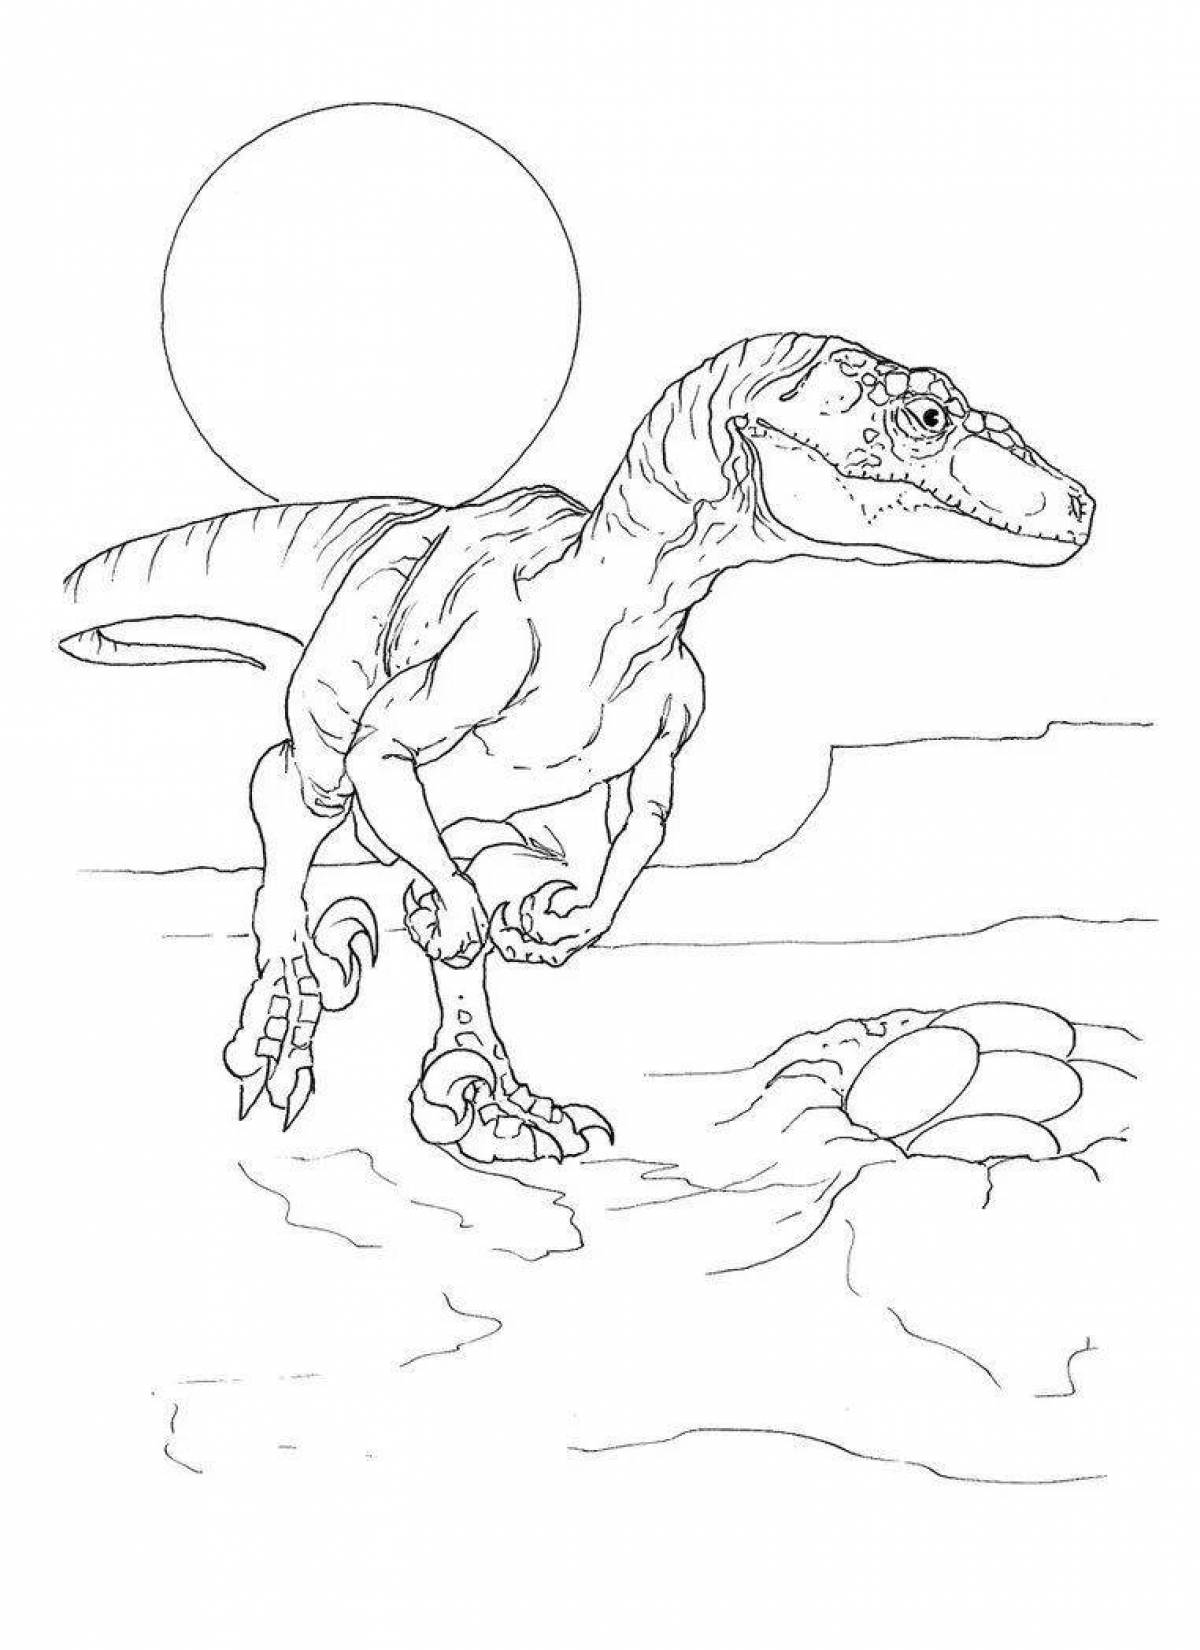 A strikingly shaded velociraptor blue coloring page